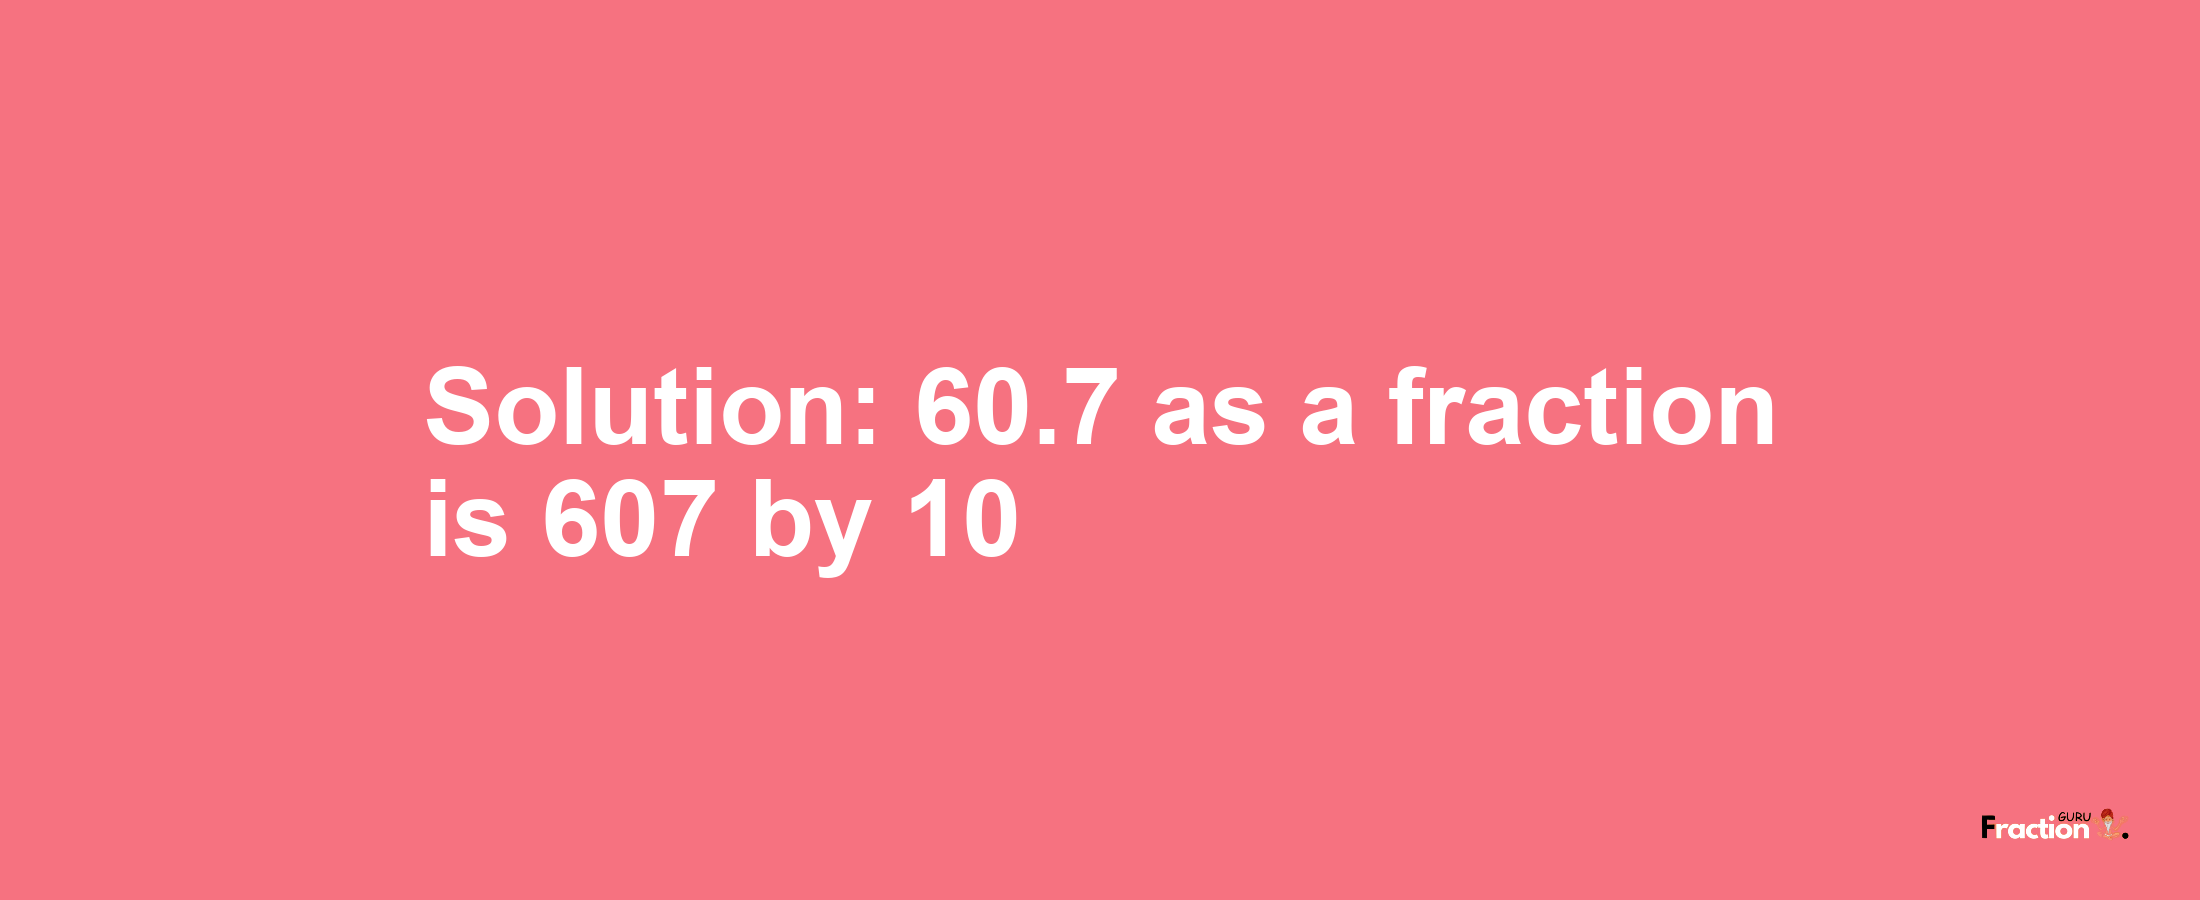 Solution:60.7 as a fraction is 607/10